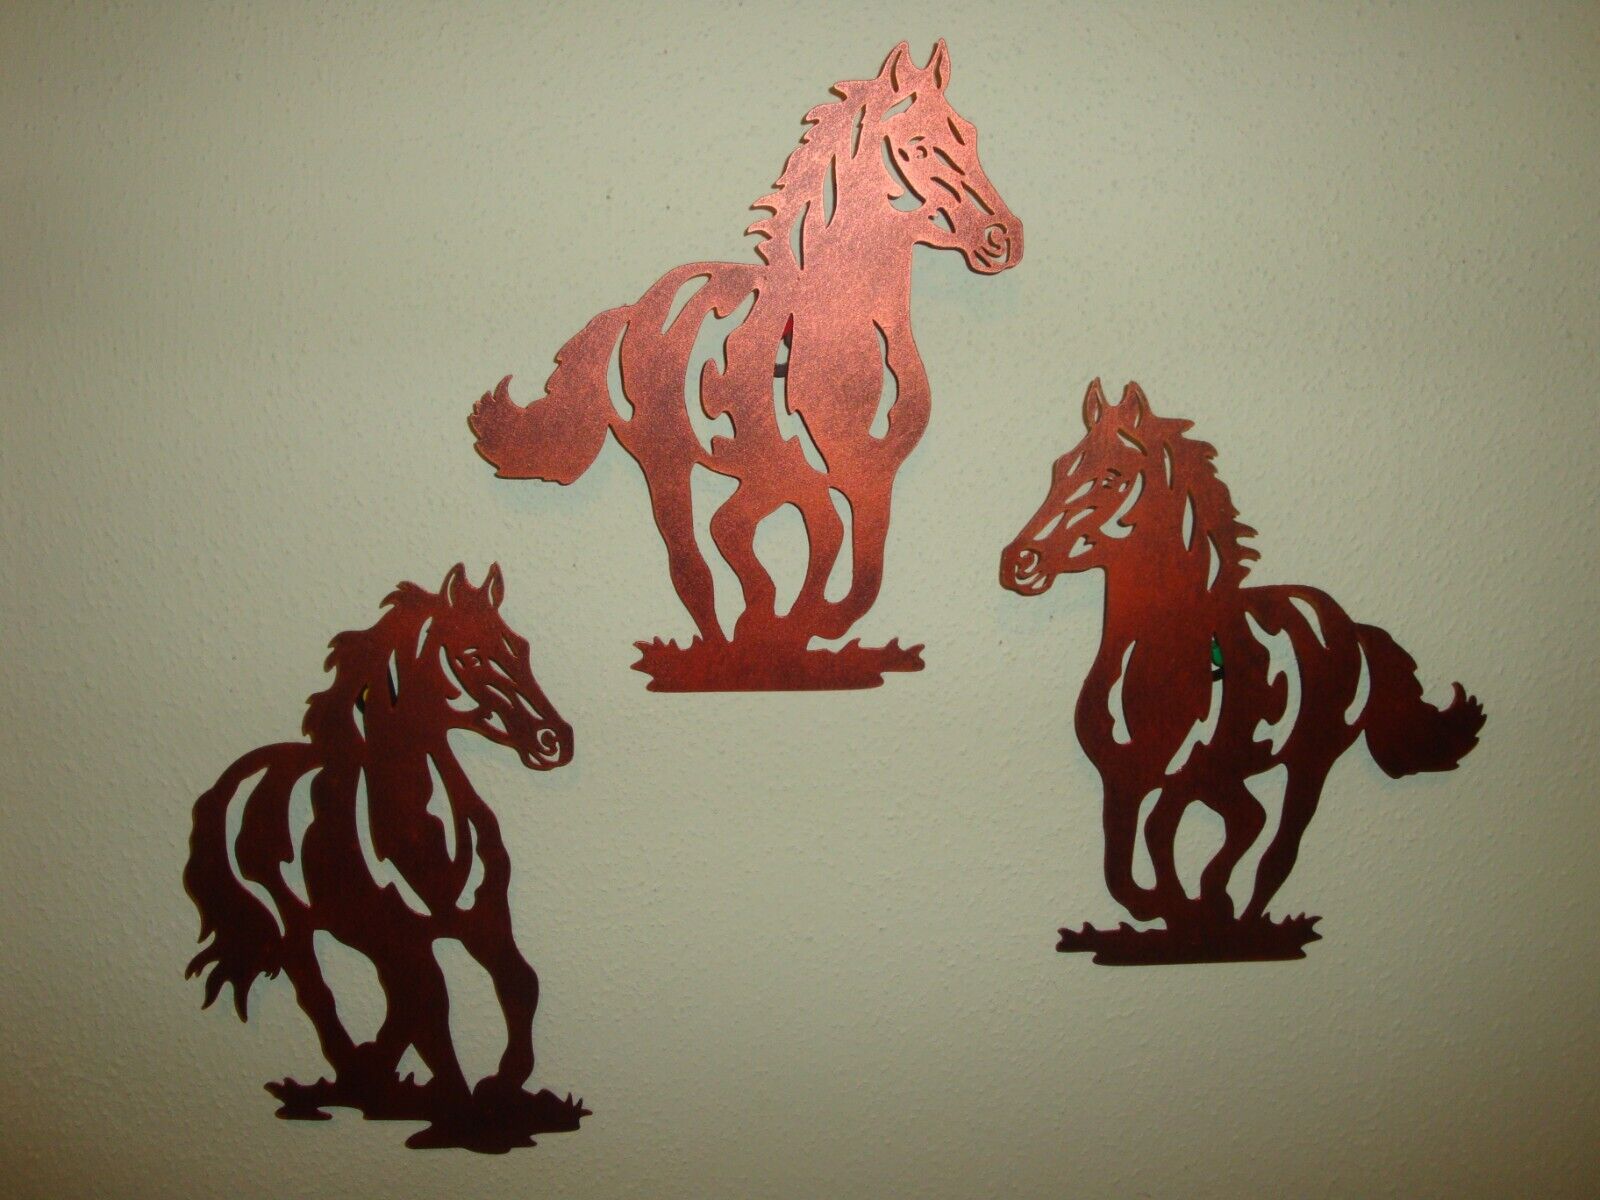 3 Copper Colored Metal Running Horses Silhouette Wall Hangings-9 x 7-Western